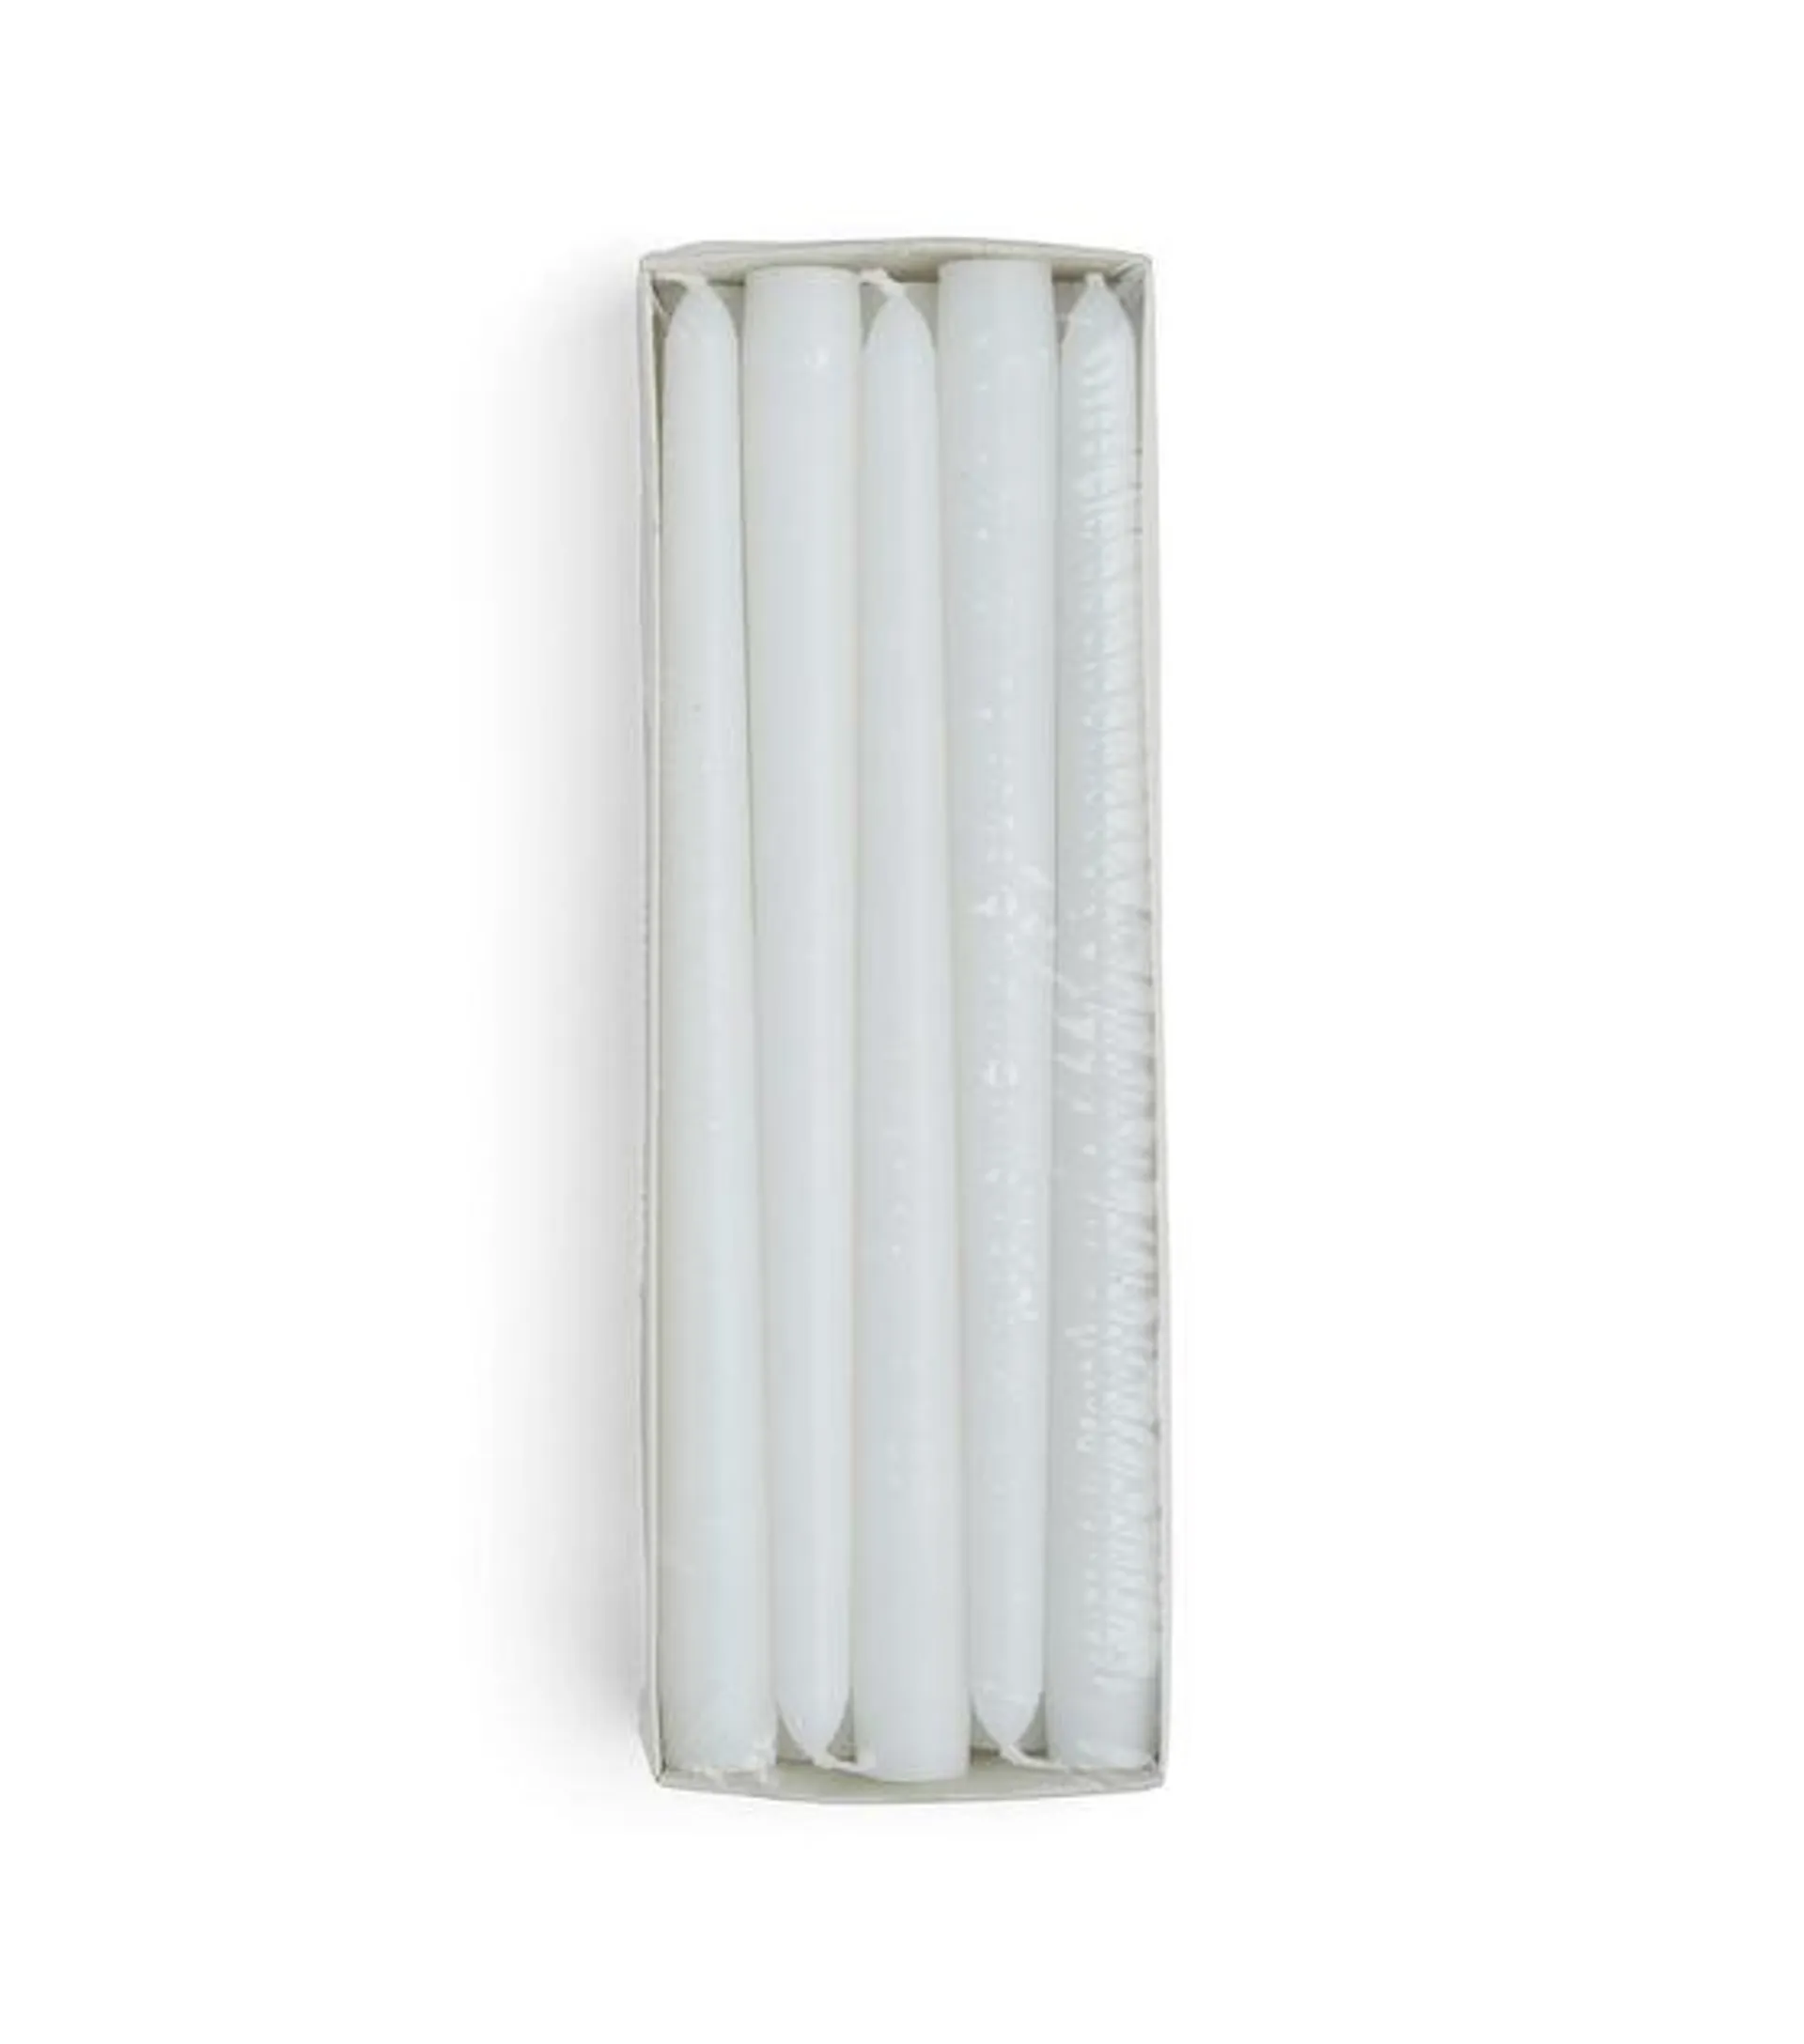 Hudson 43 Candle & Light Collection 10" Unscented White Taper Candles 10pk